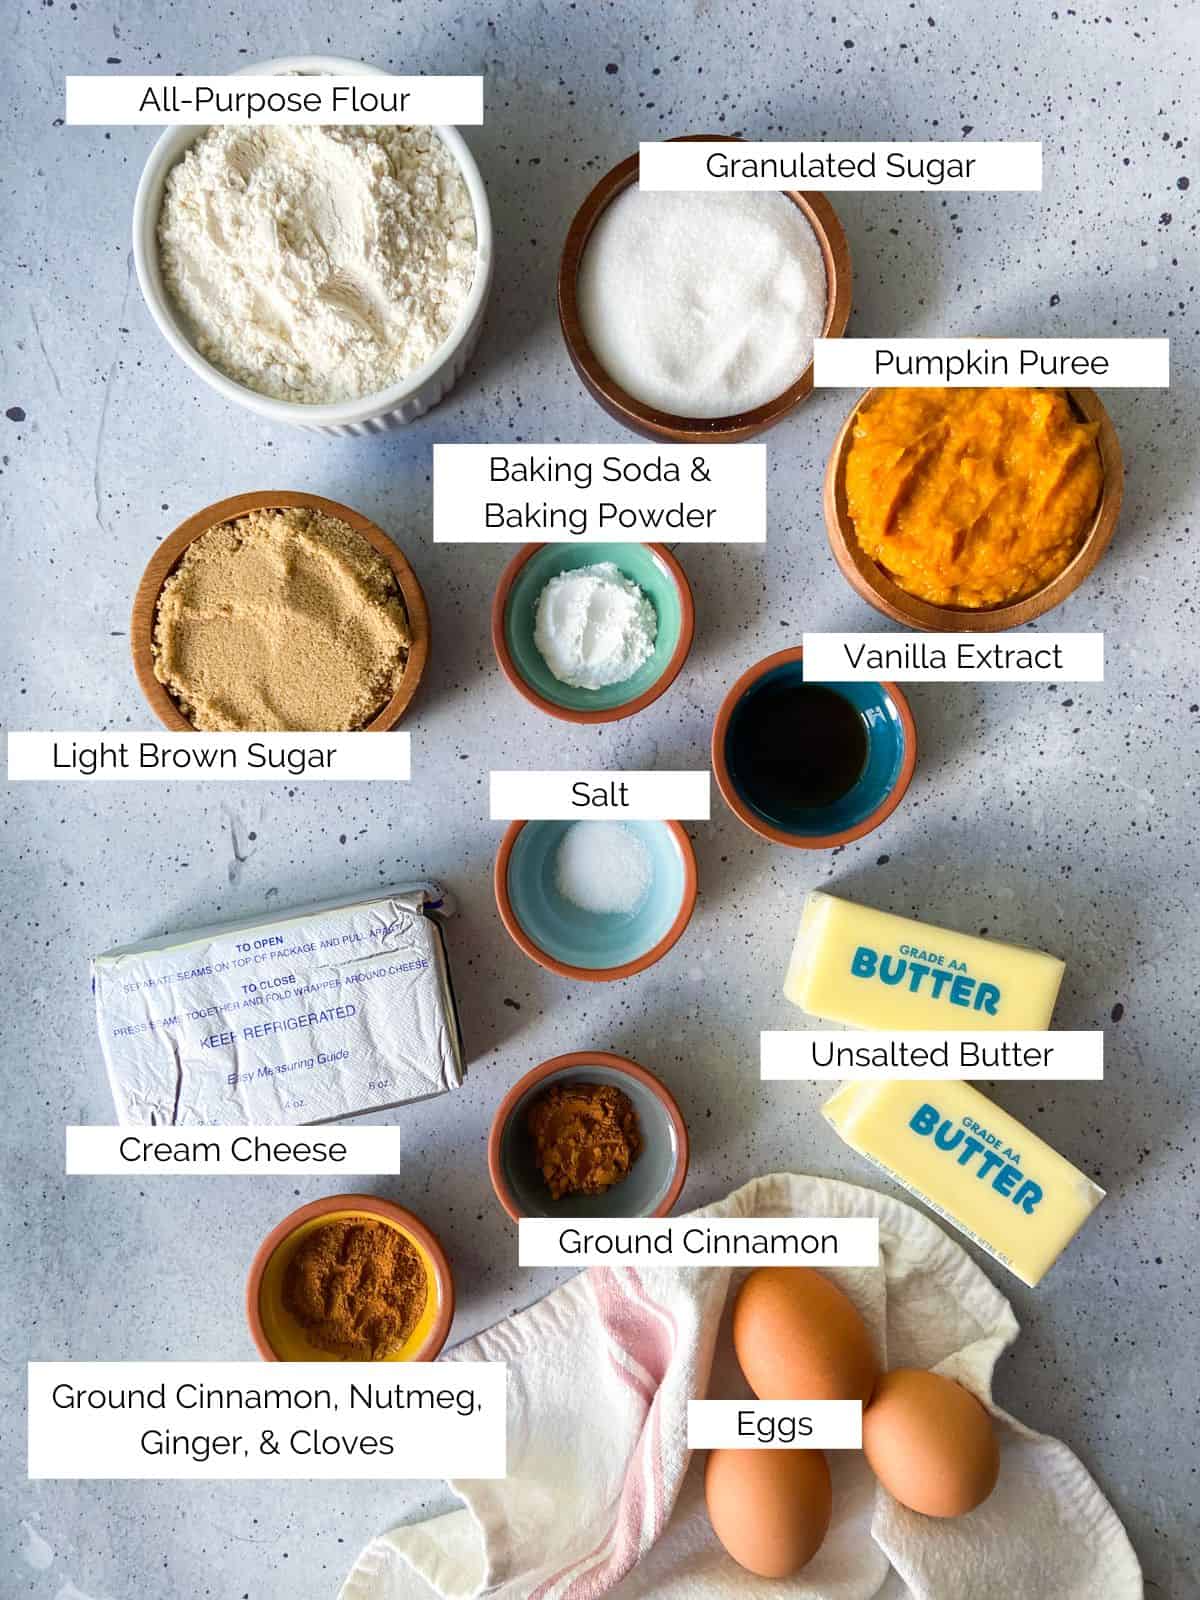 The ingredients you need for this recipe.